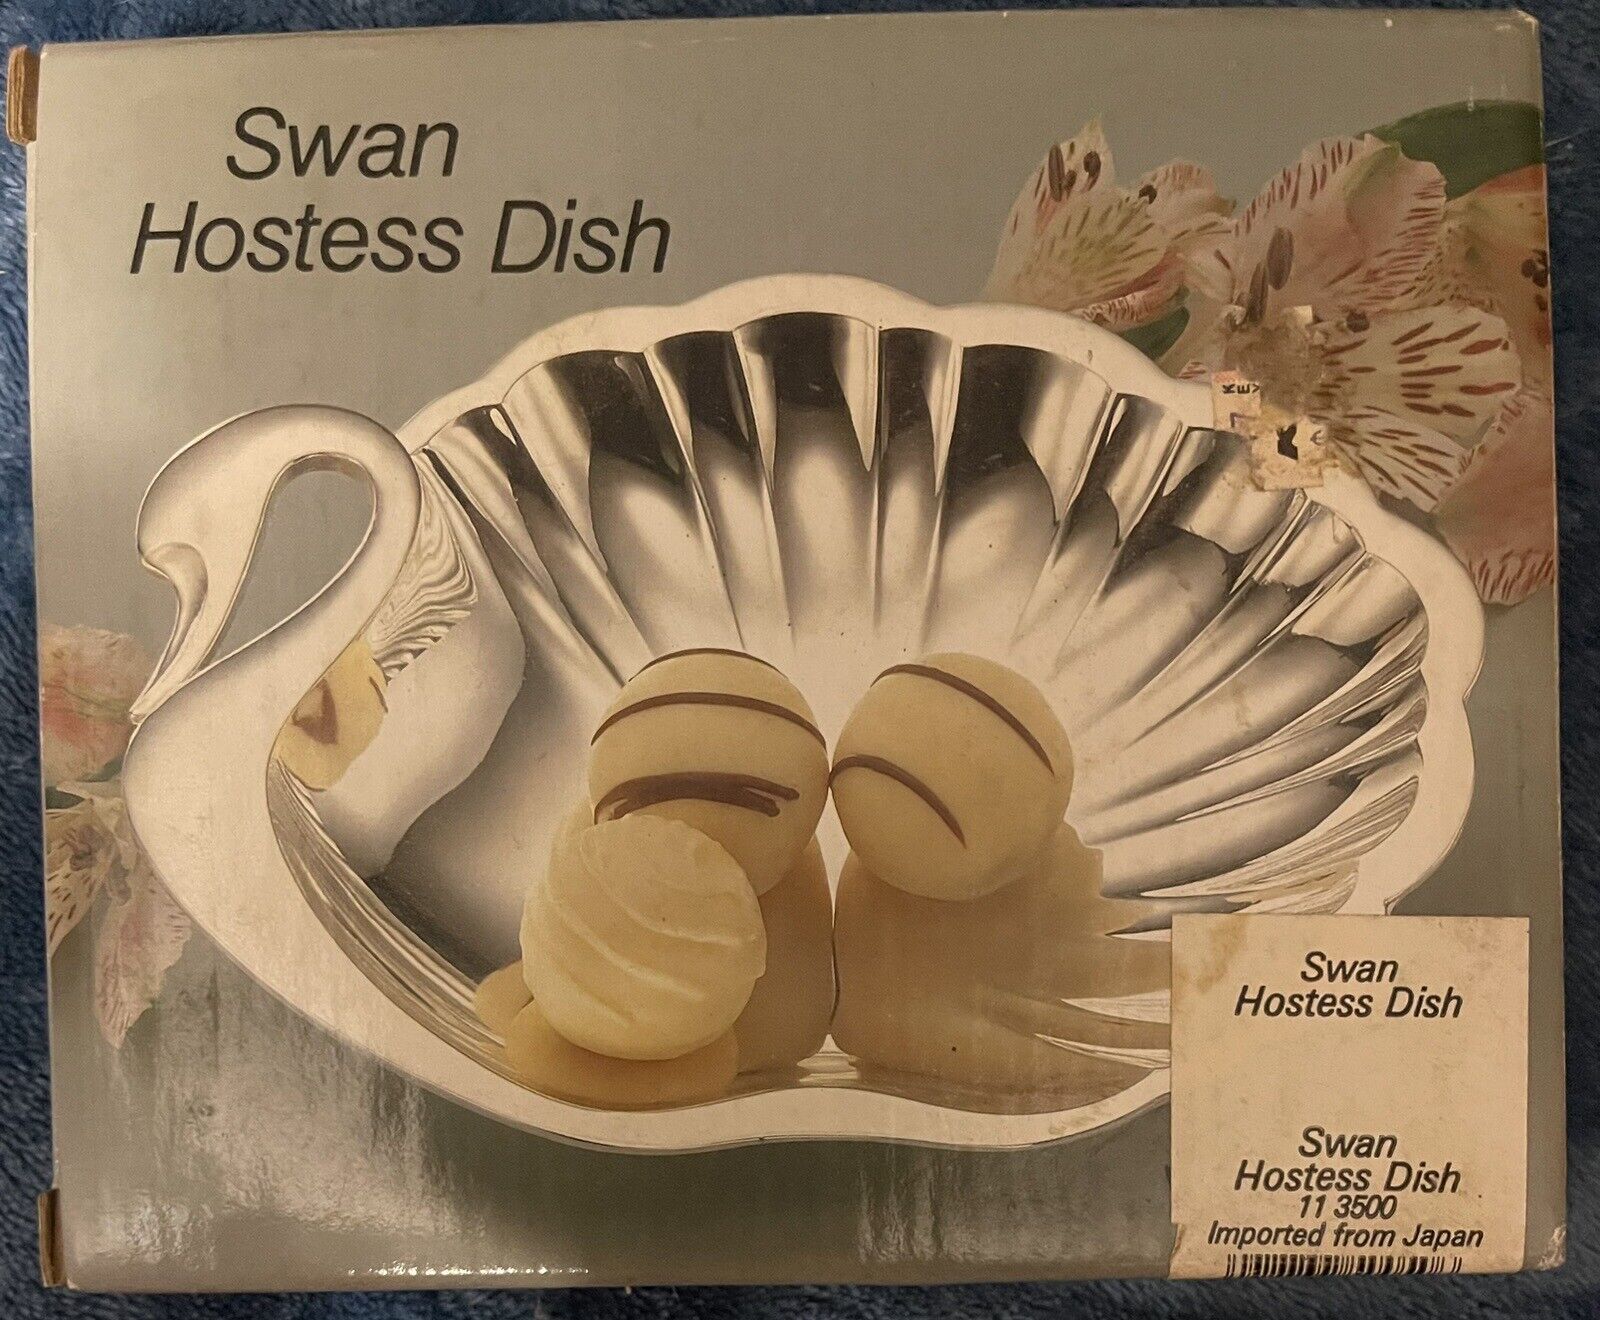 Vntg 70’s Wm A Rogers Silverplate Swan Hostess Dish No 011 3500, New, Never Open